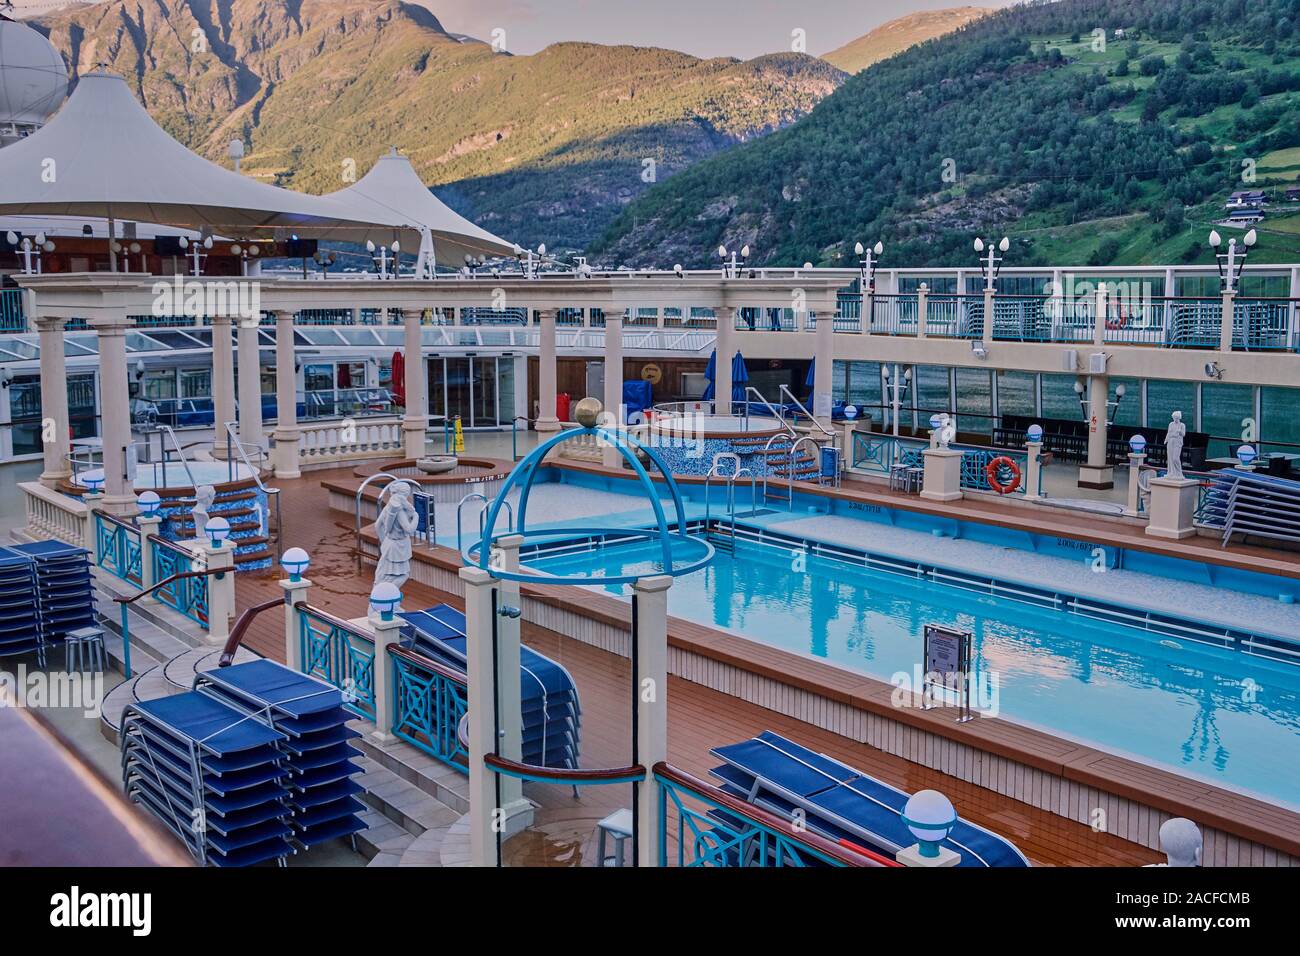 Taken fron the Lido deck of the Norwegian Sprit. The small village Flåm is one of the most popular destinations in Norway and Scandinavia Stock Photo